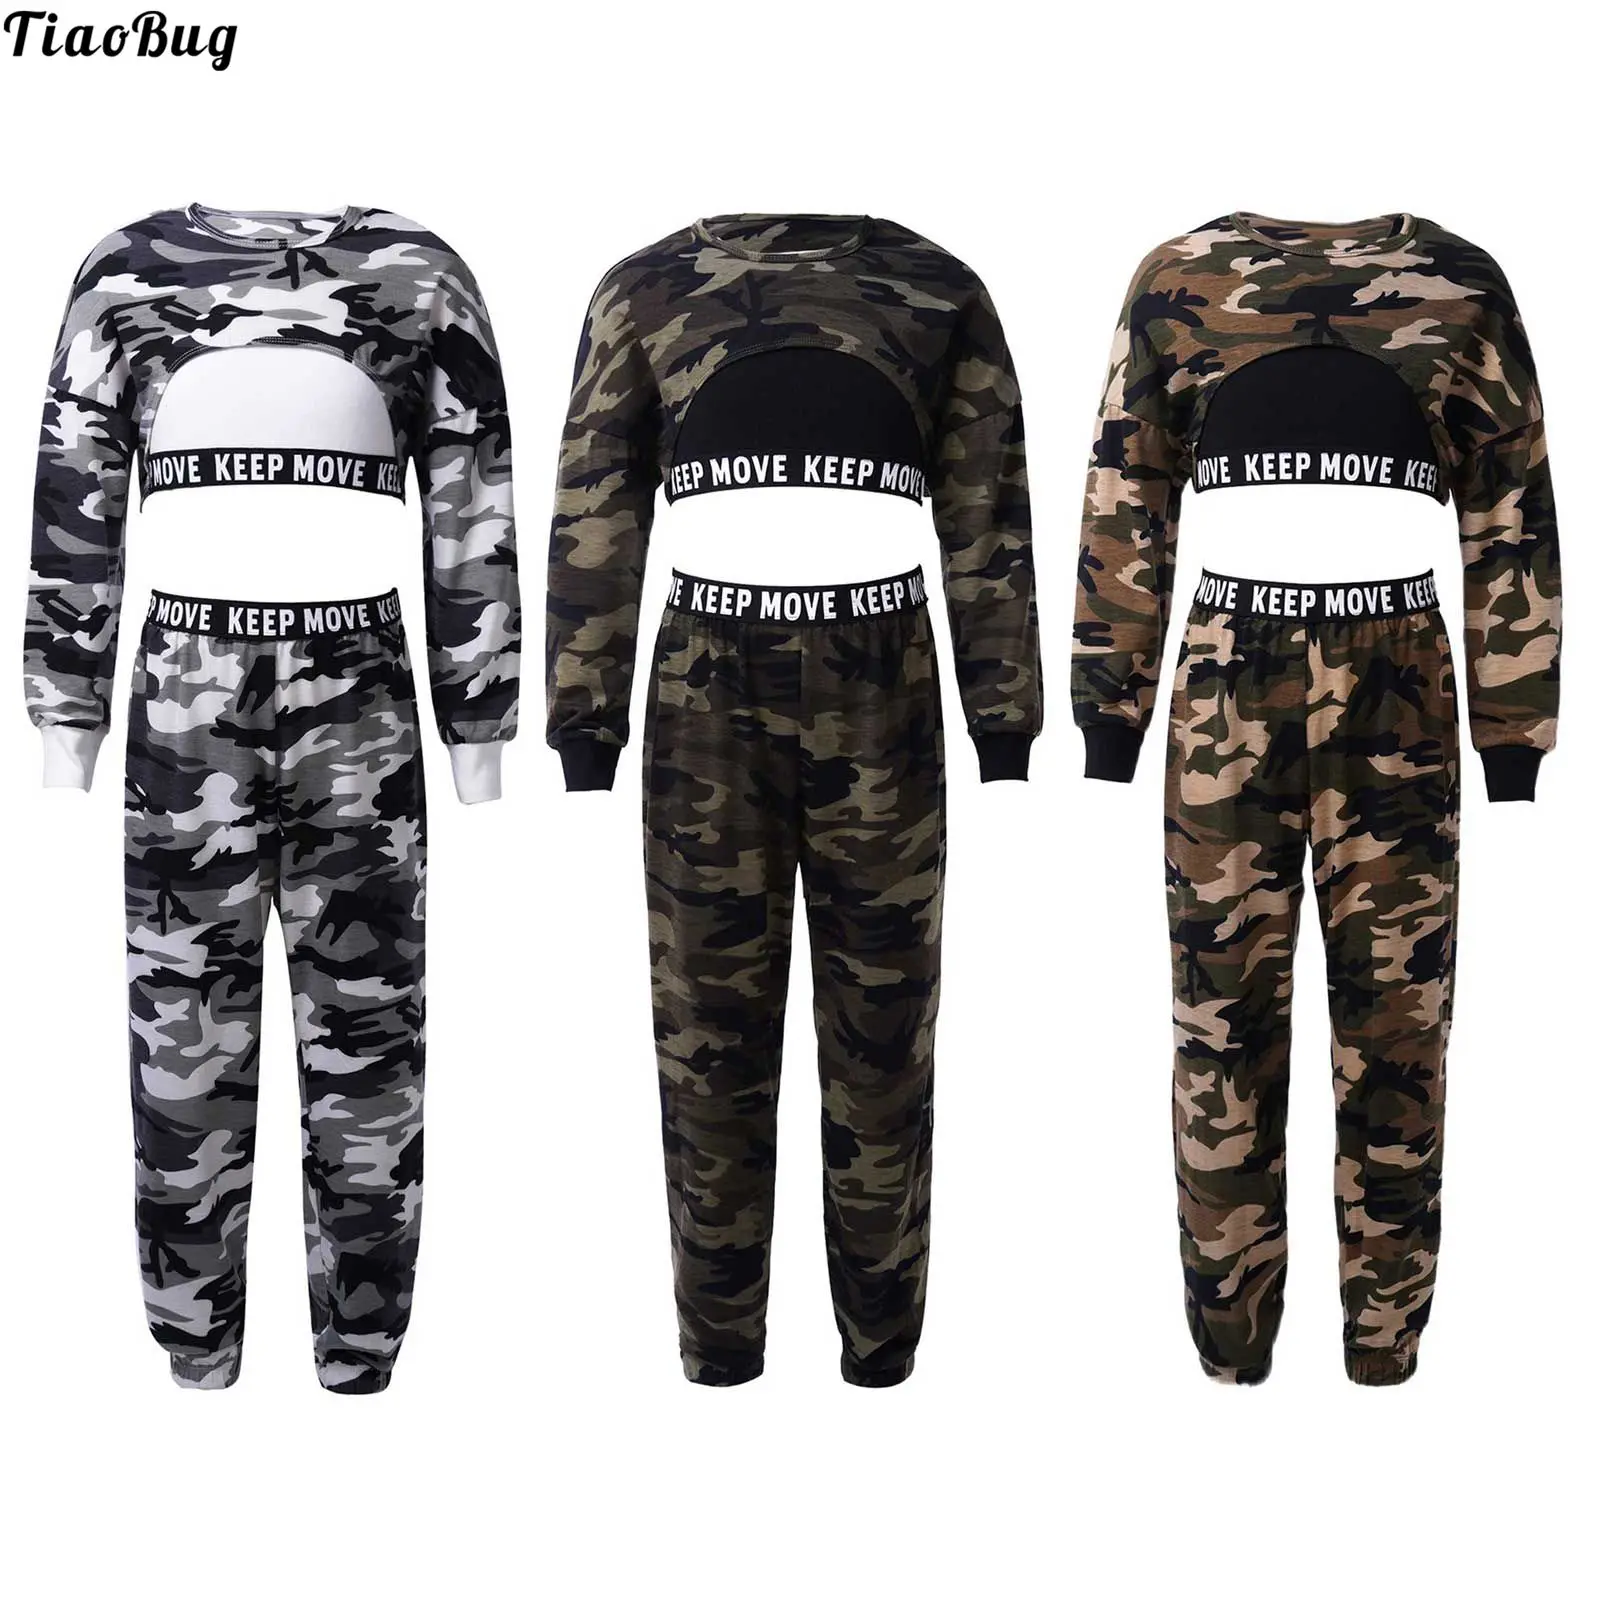 

TiaoBug 3Pcs Kids Girls Camouflage Print Sport Suit Round Neck Sleeveless Crop Vest With Long Sleeves Cover Up Top And Pants Set